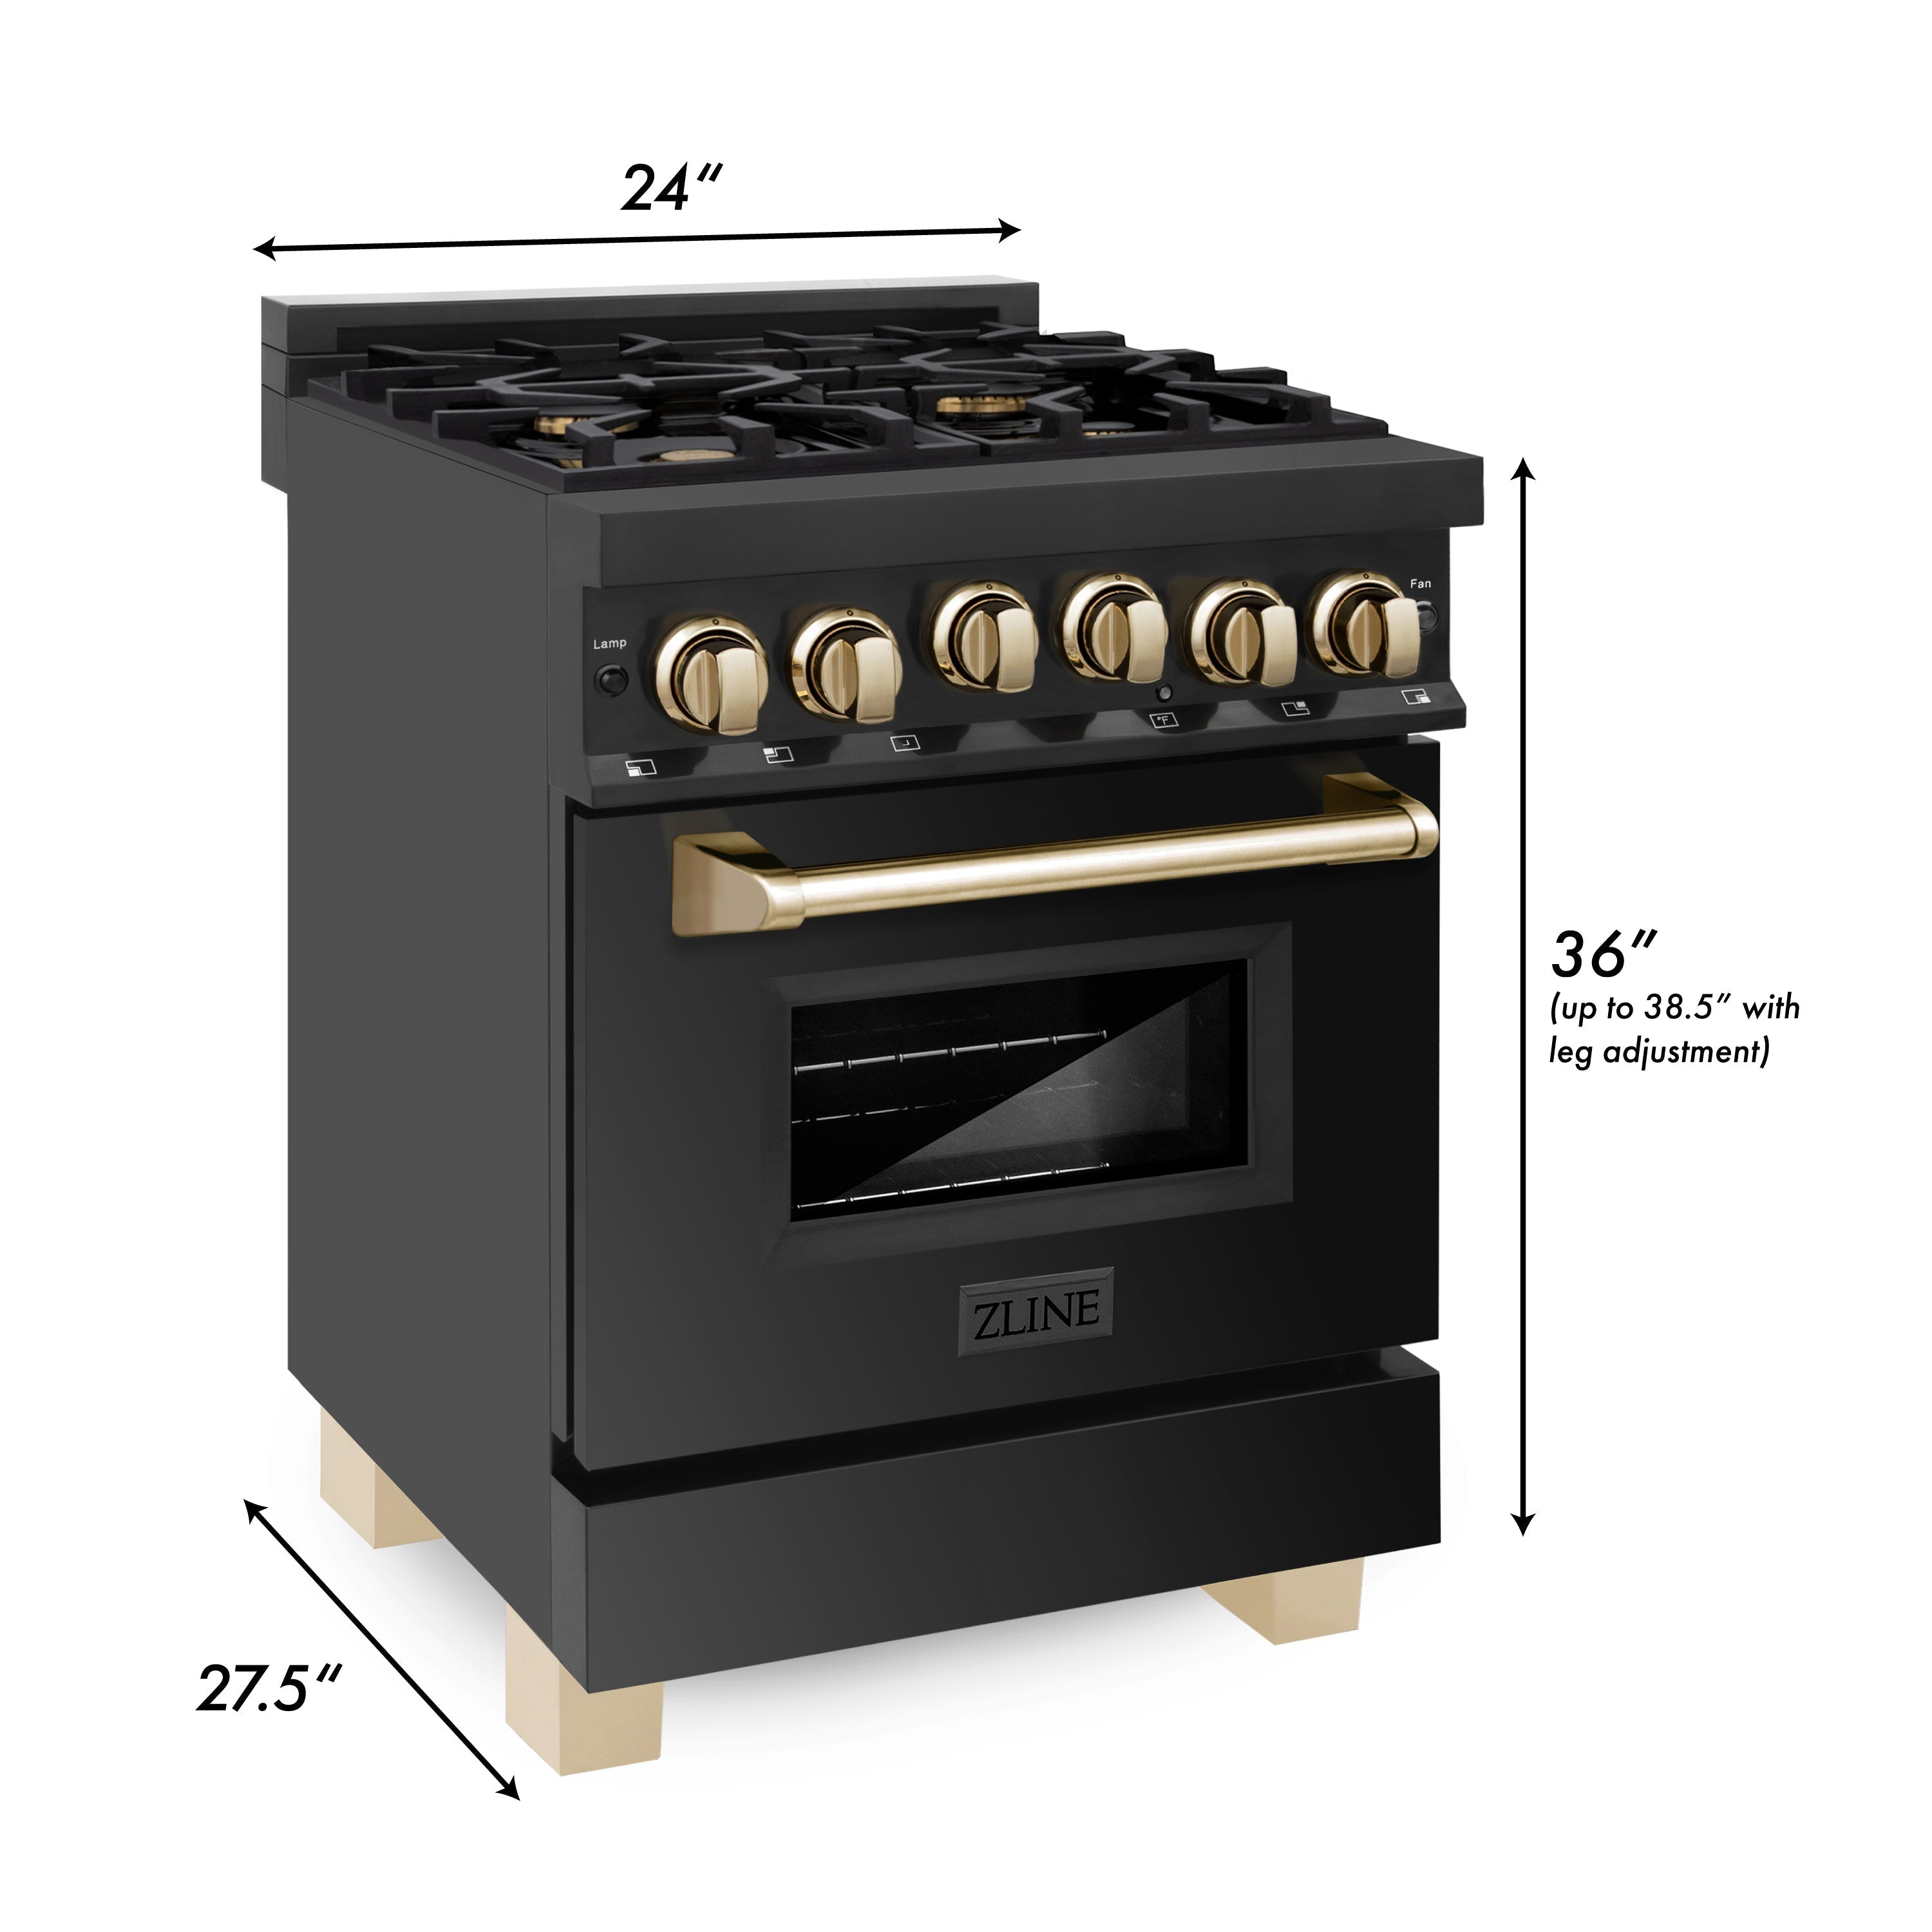 ZLINE Autograph Edition 24" 2.8 cu. ft. Range with Gas Stove and Gas Oven in Black Stainless Steel with Polished Gold Accents (RGBZ-24-G)